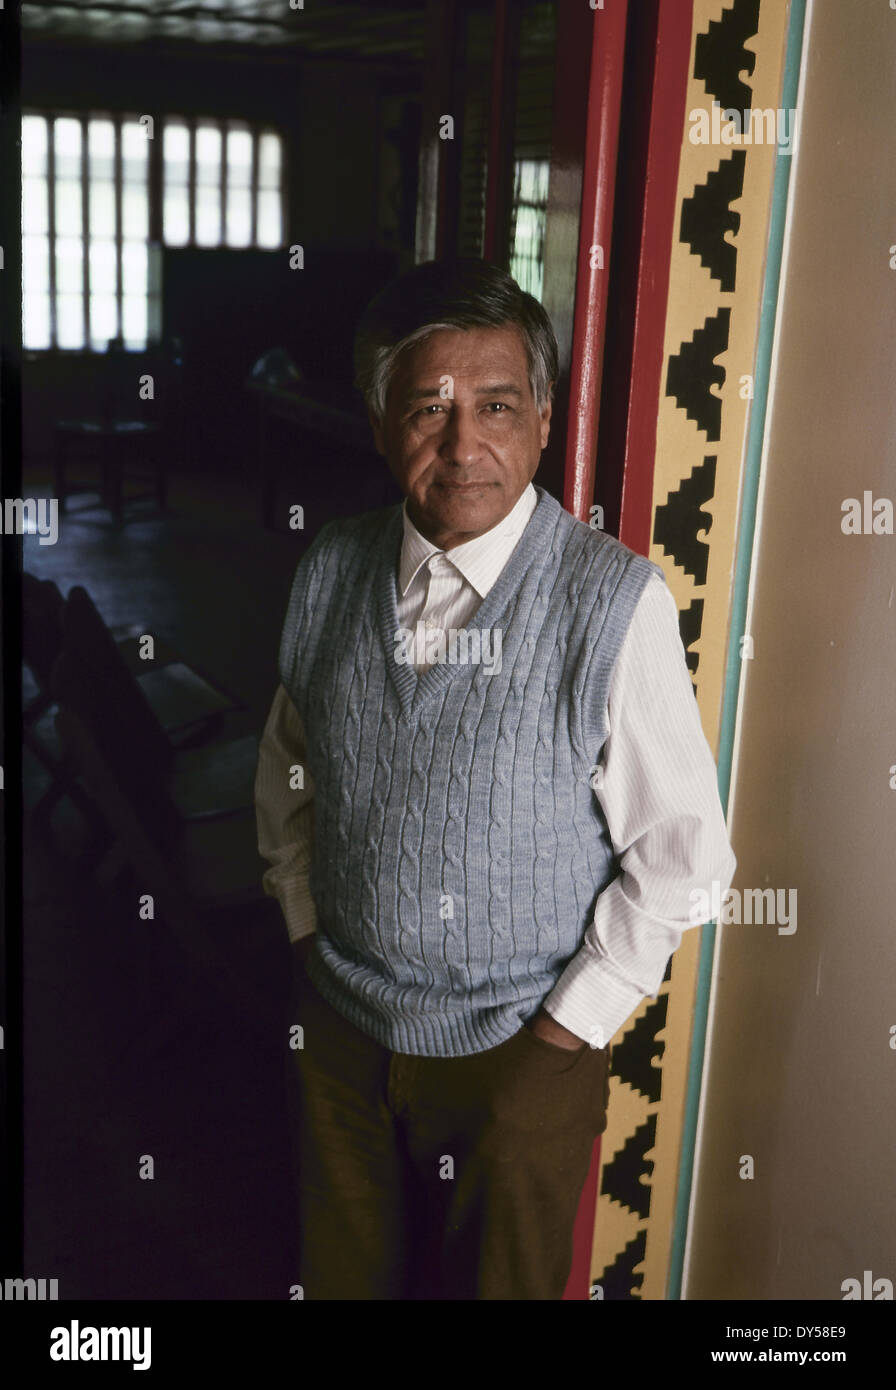 April 3, 1990 - Bakersfield, CA, USA - A American farm worker, labor leader and civil rights activist, who, with Dolores Huerta, co-founded the National Farm Workers Association. Photographed at the Villa La Paz Conference & Education Center (Credit Image: © Mark Richards/ZUMAPRESS.com) Stock Photo